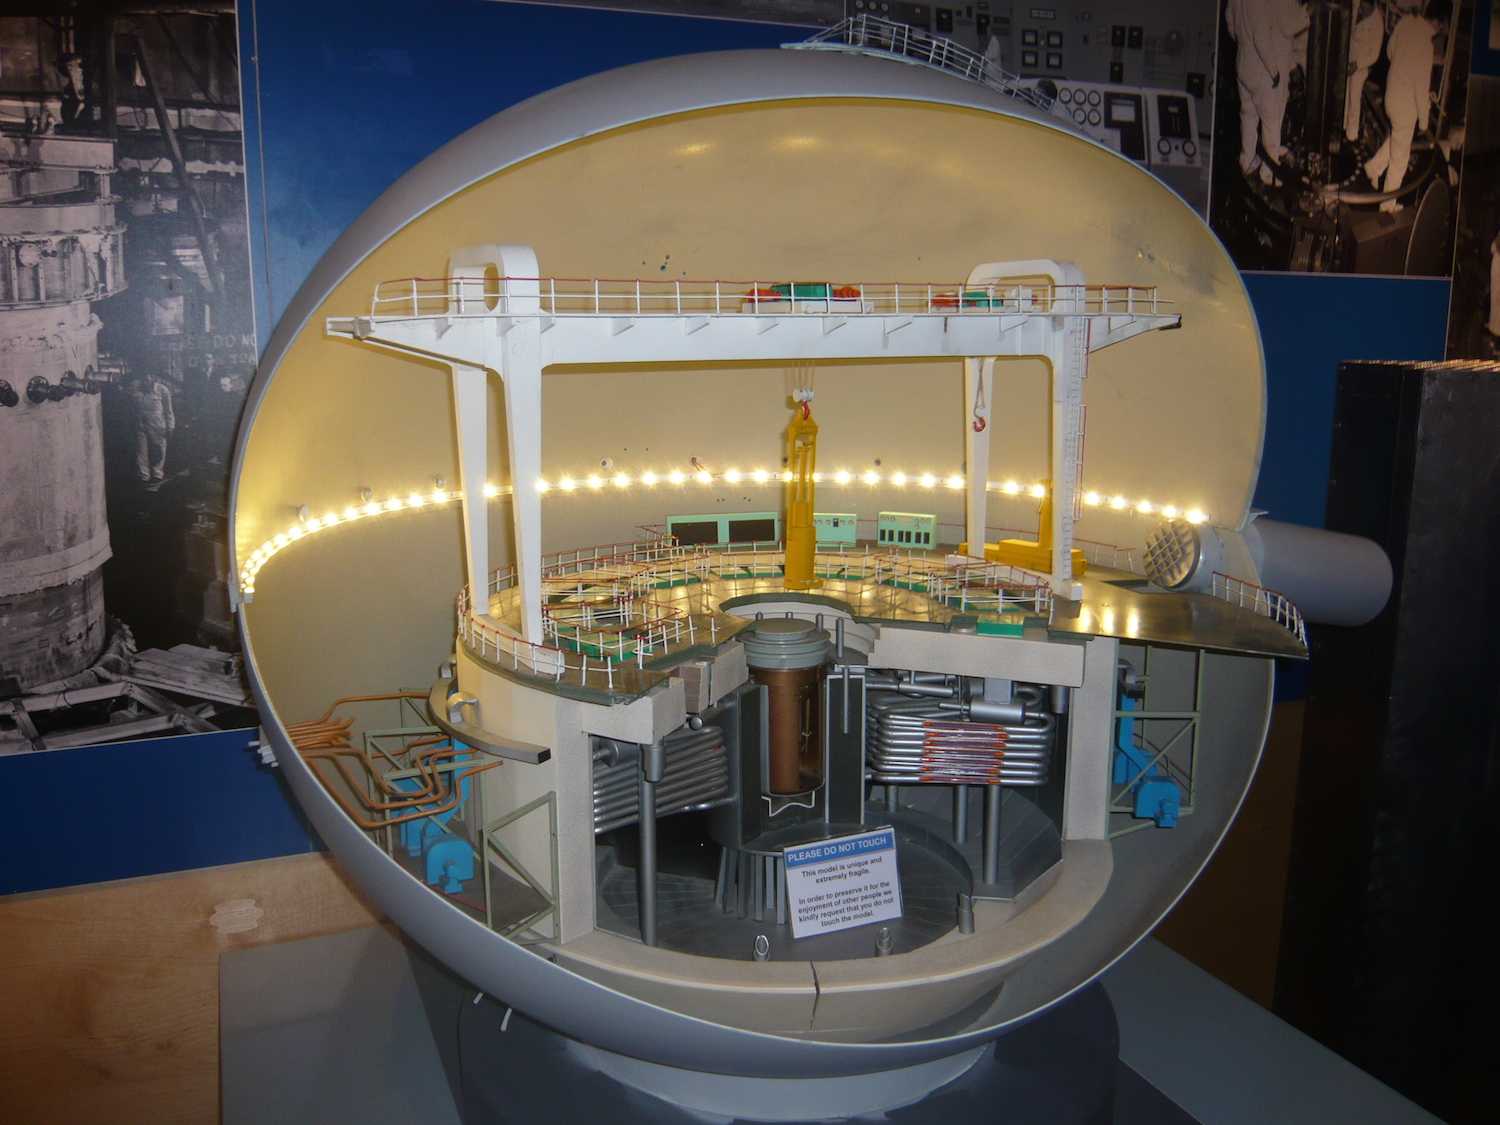 Part of the Dounreay Nuclear Research Centre Exhibition